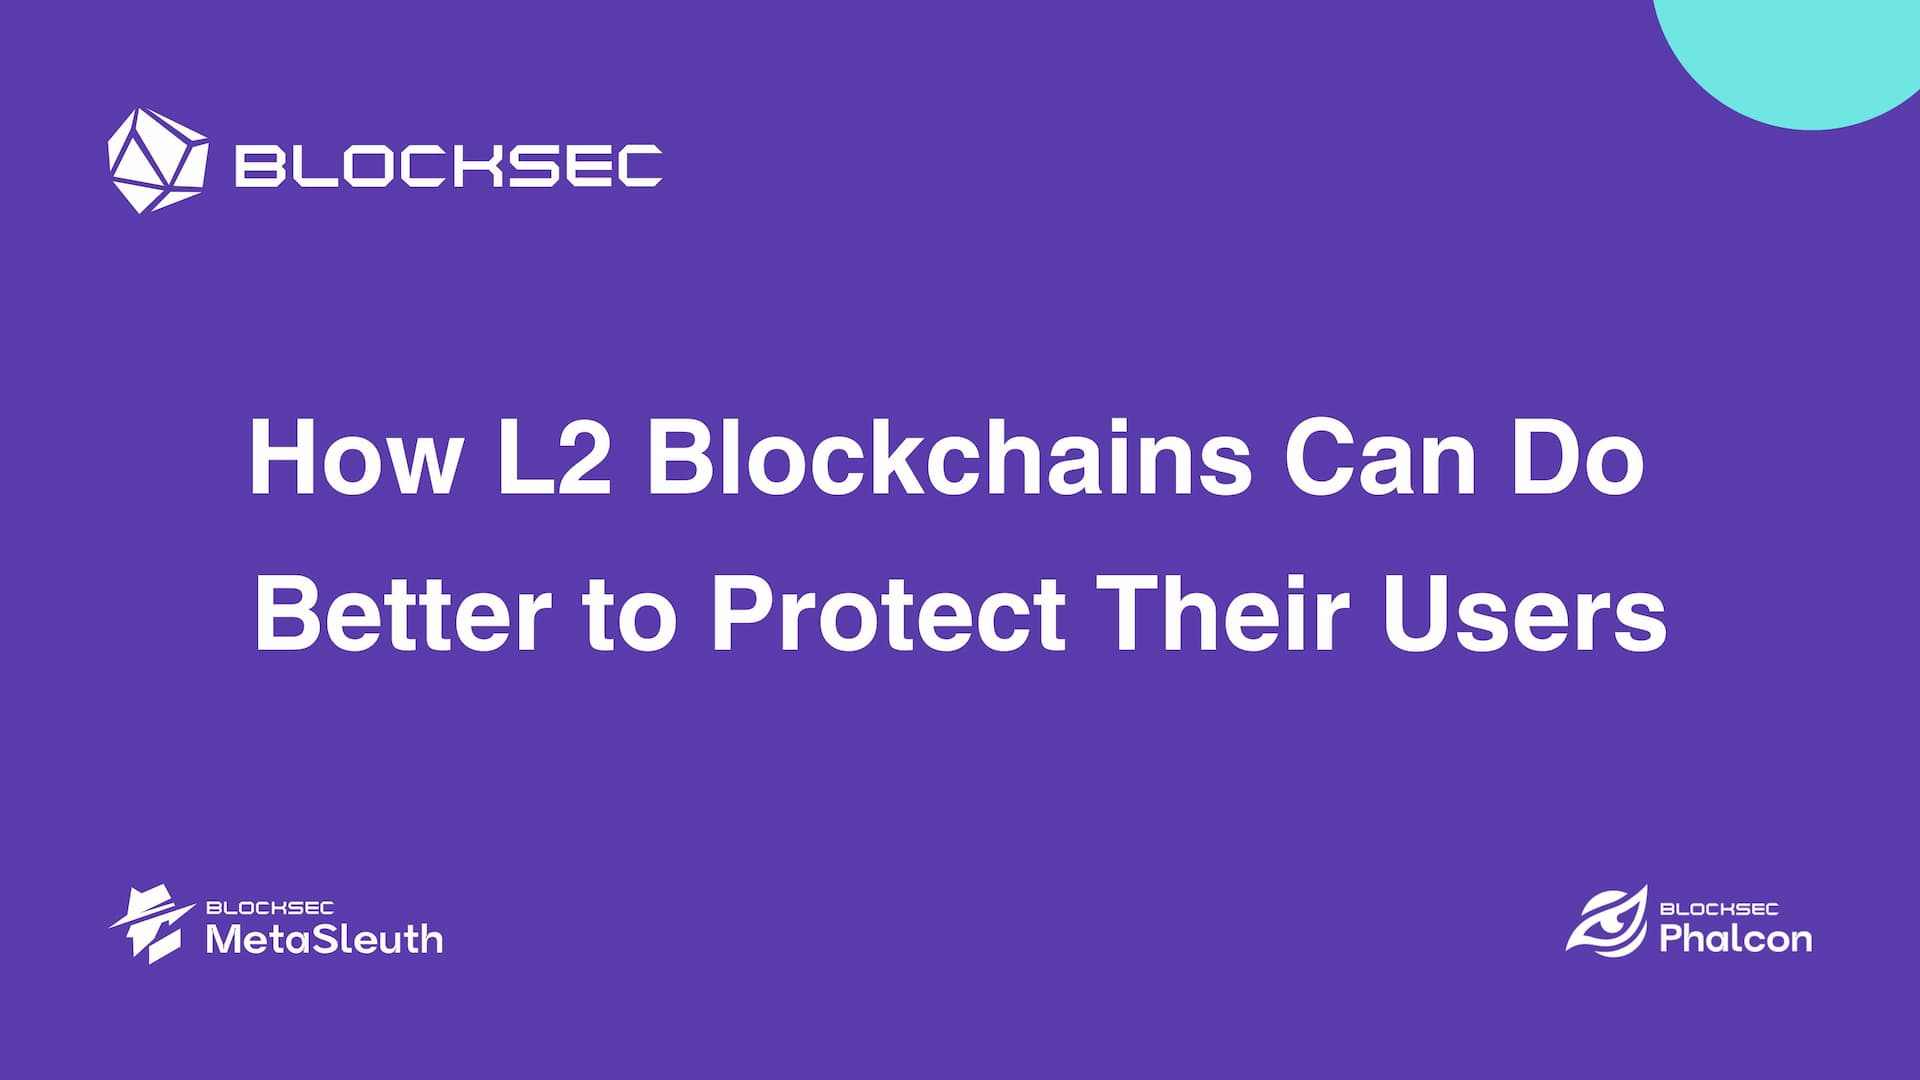 How L2 Blockchains Can Do Better to Protect Their Users